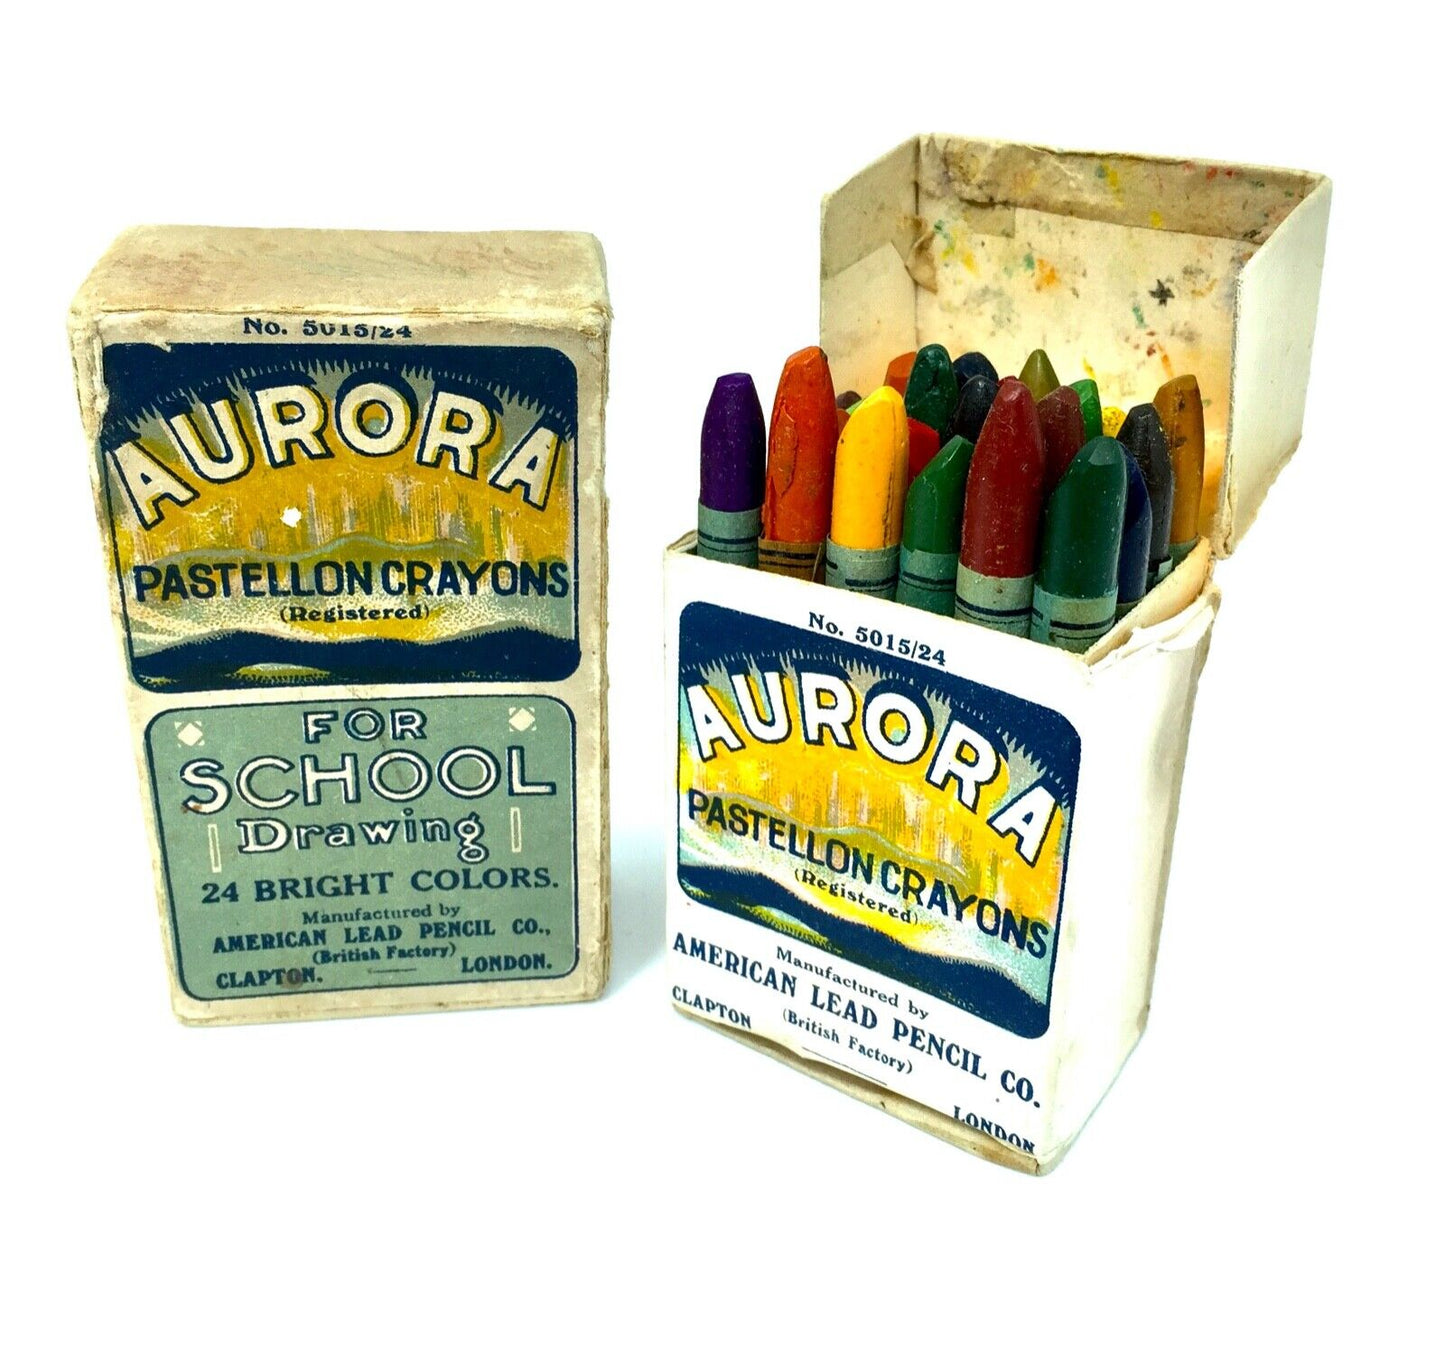 Antique Box of Early 20th Century Lead Crayons by Aurora of American Pencil Co